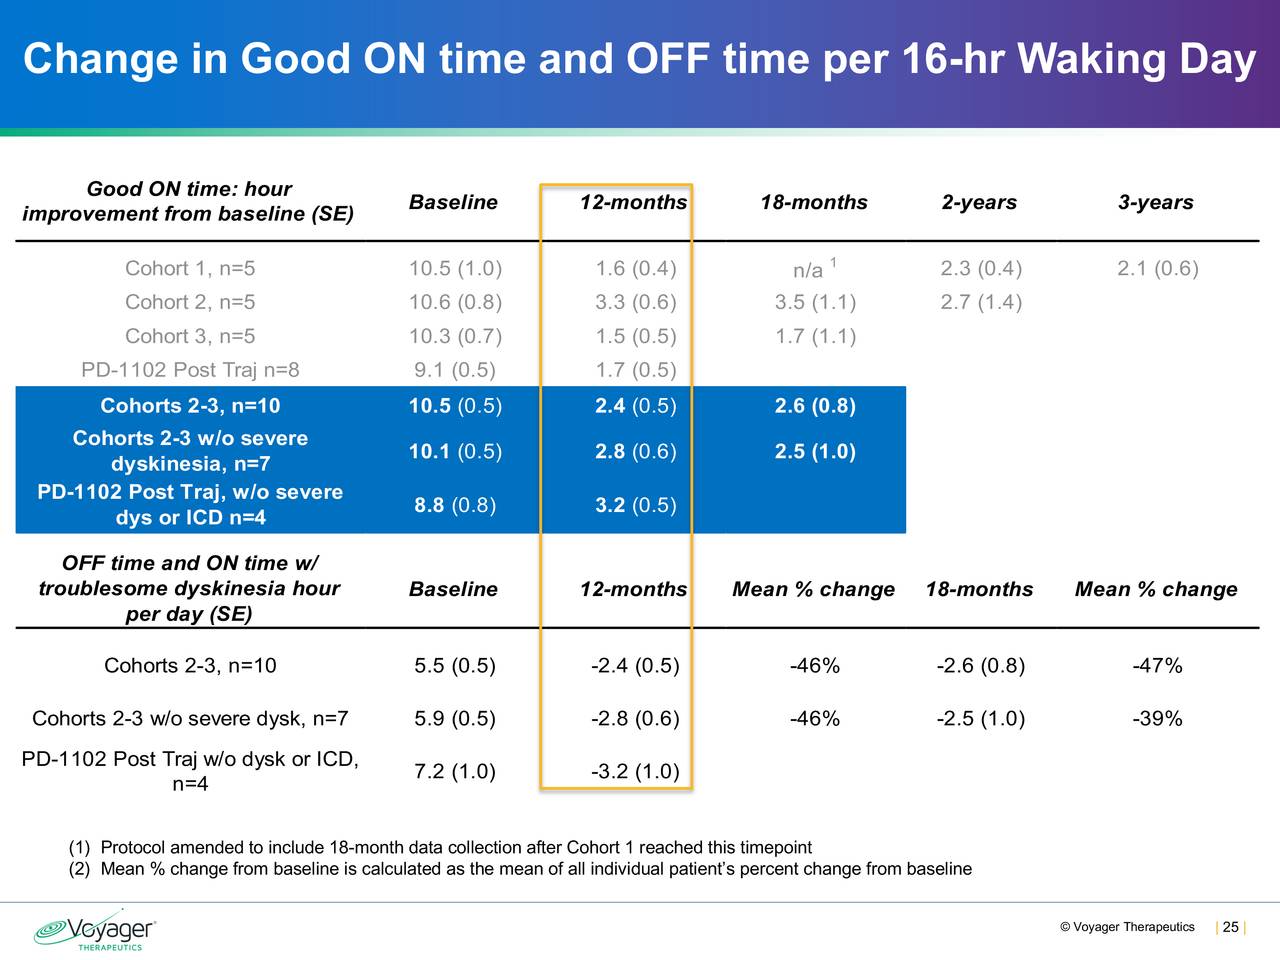 Change in Good ON time and OFF time per 16-hr Waking Day